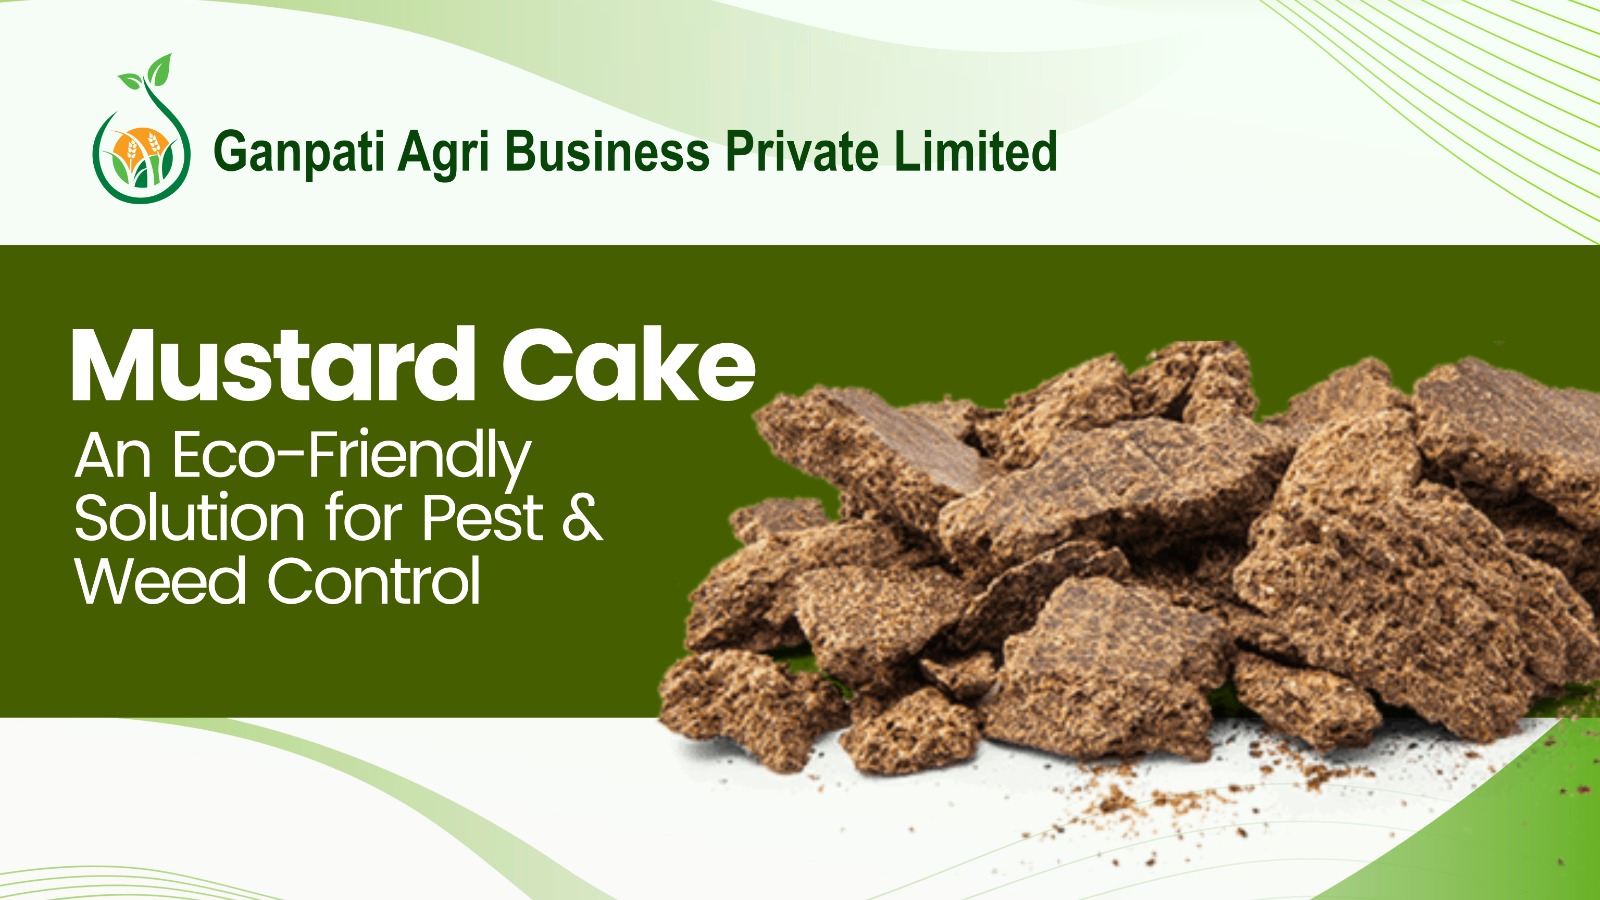 Mustard Cake: An Eco-Friendly Solution for Pest & Weed Control